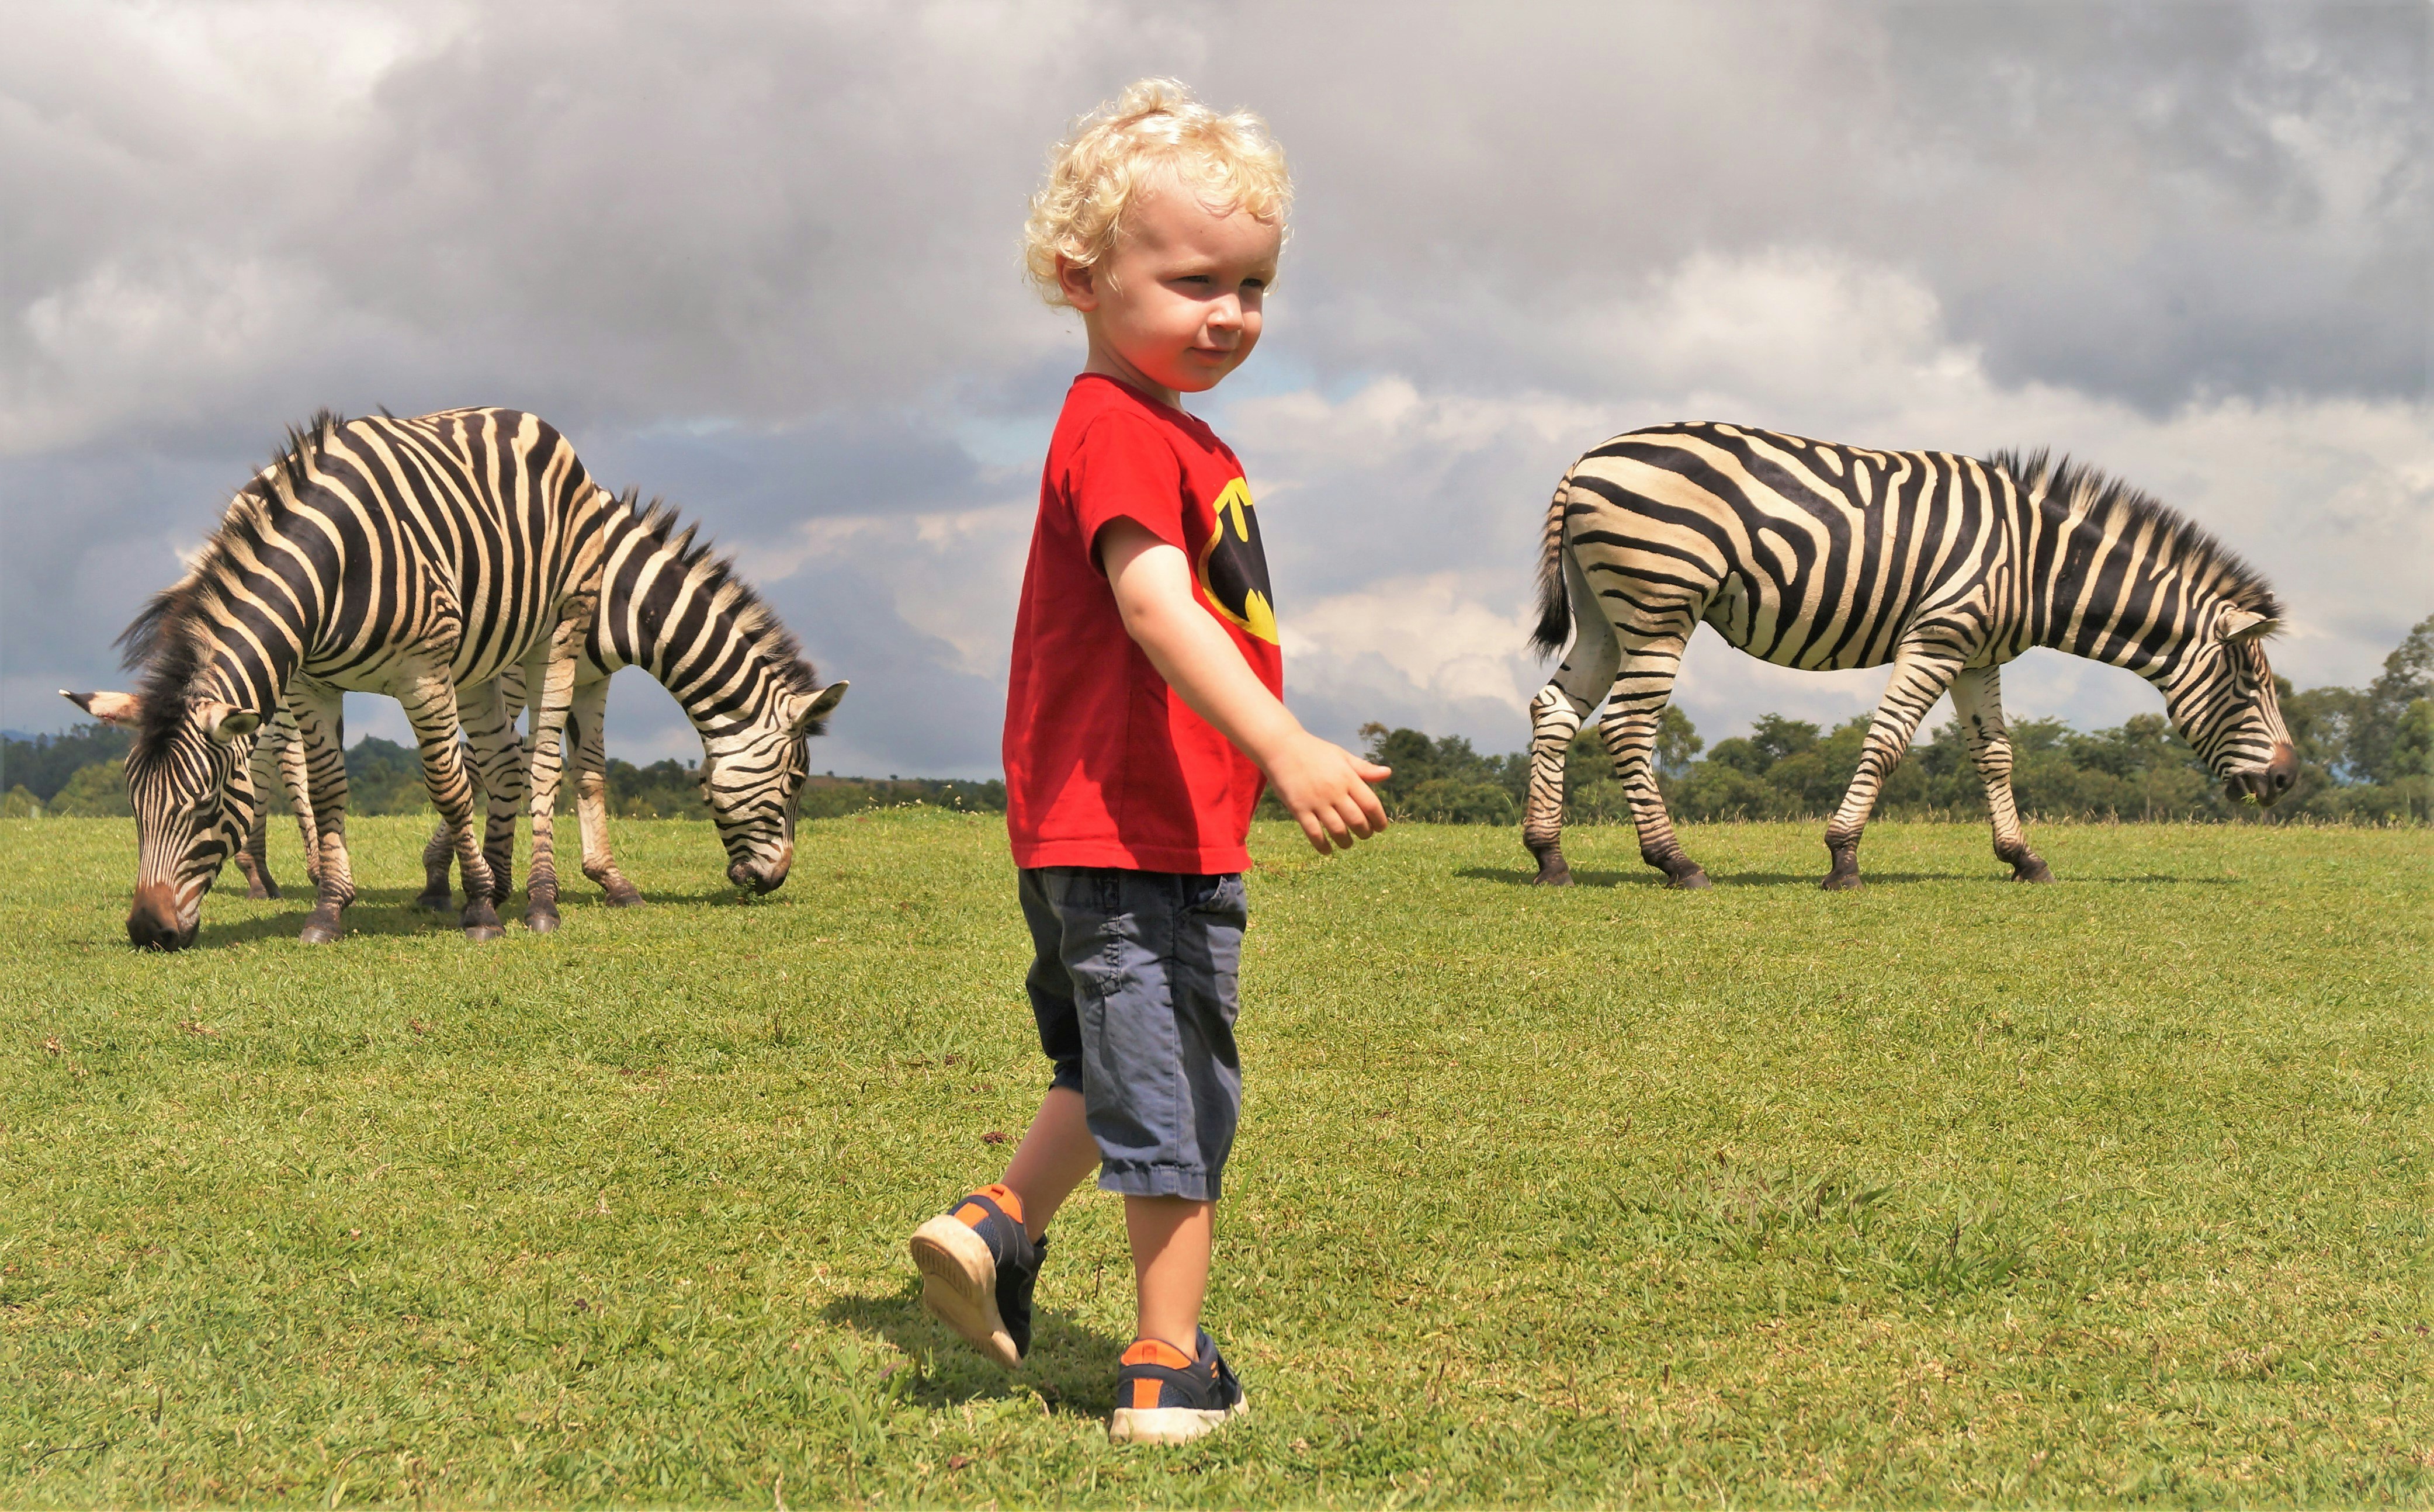 A young boy wearing a batman T-shirt is standing on grass. Behind him, three zebras are visible; a pair to his left, and one to his right.